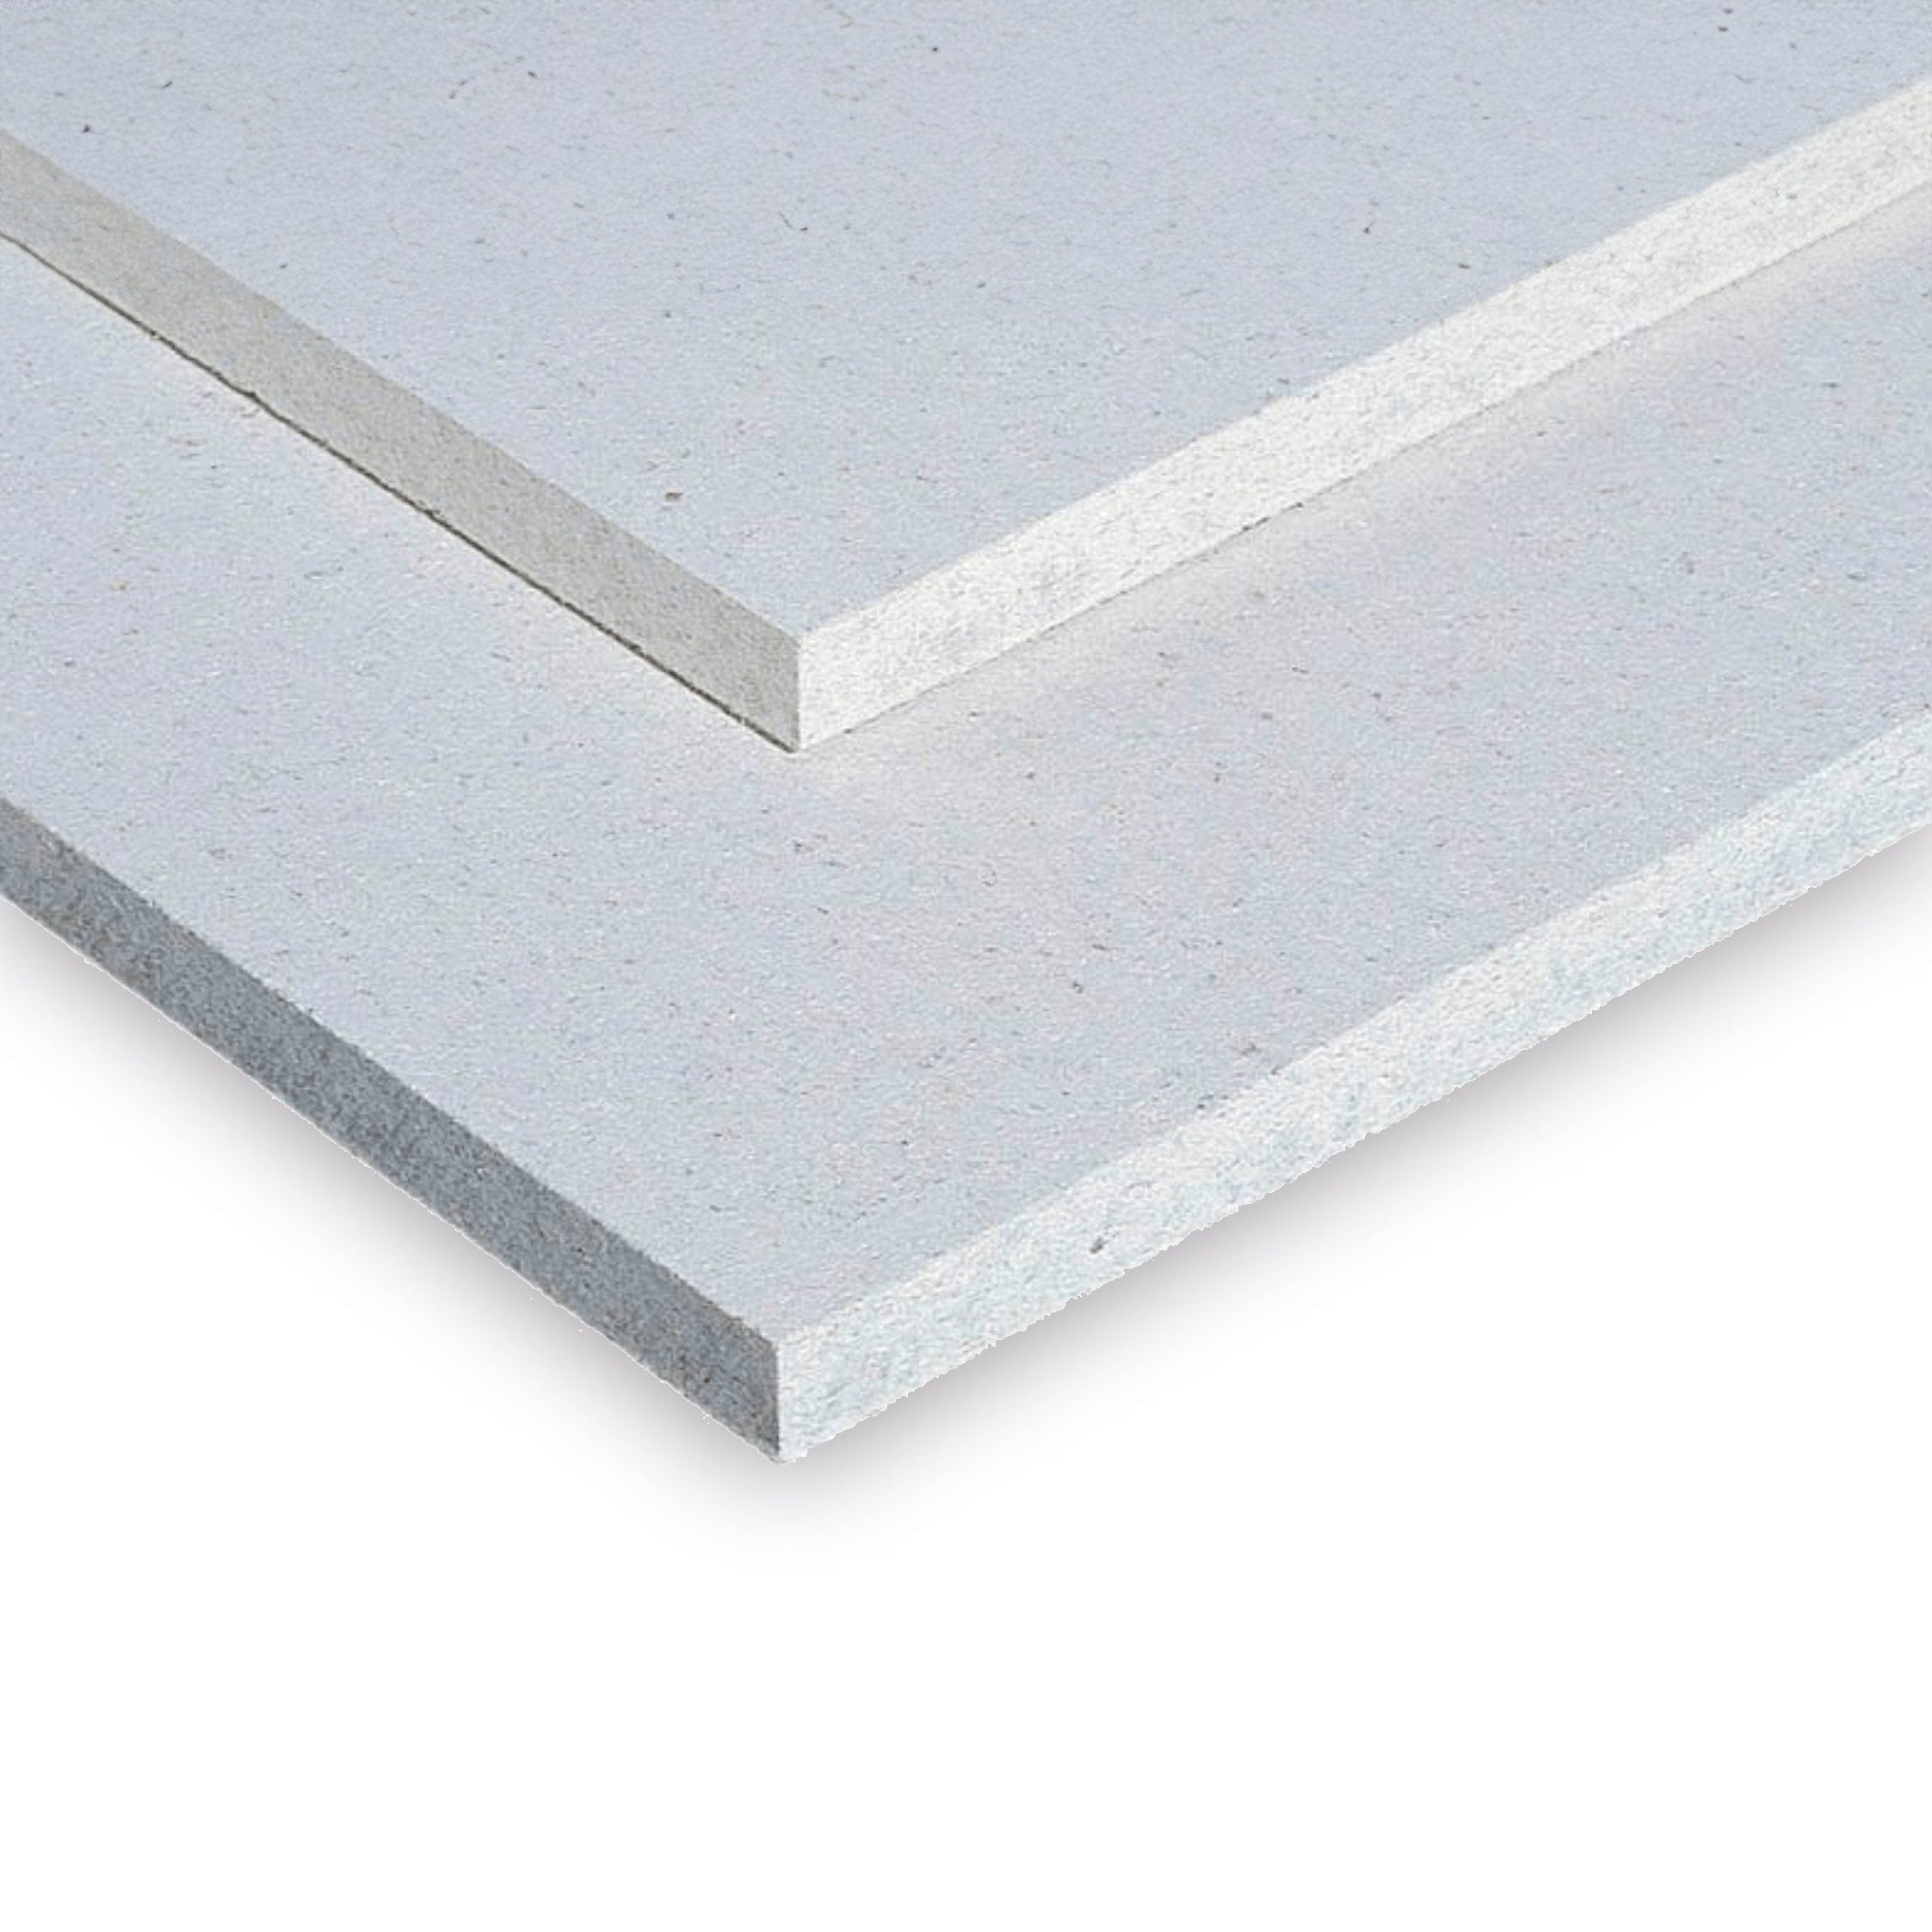 Fermacell Fermacell® 2E22 Dry Screed Overlay Board | 1500mm x 500mm x 25mm 4007548004084 IUK01529